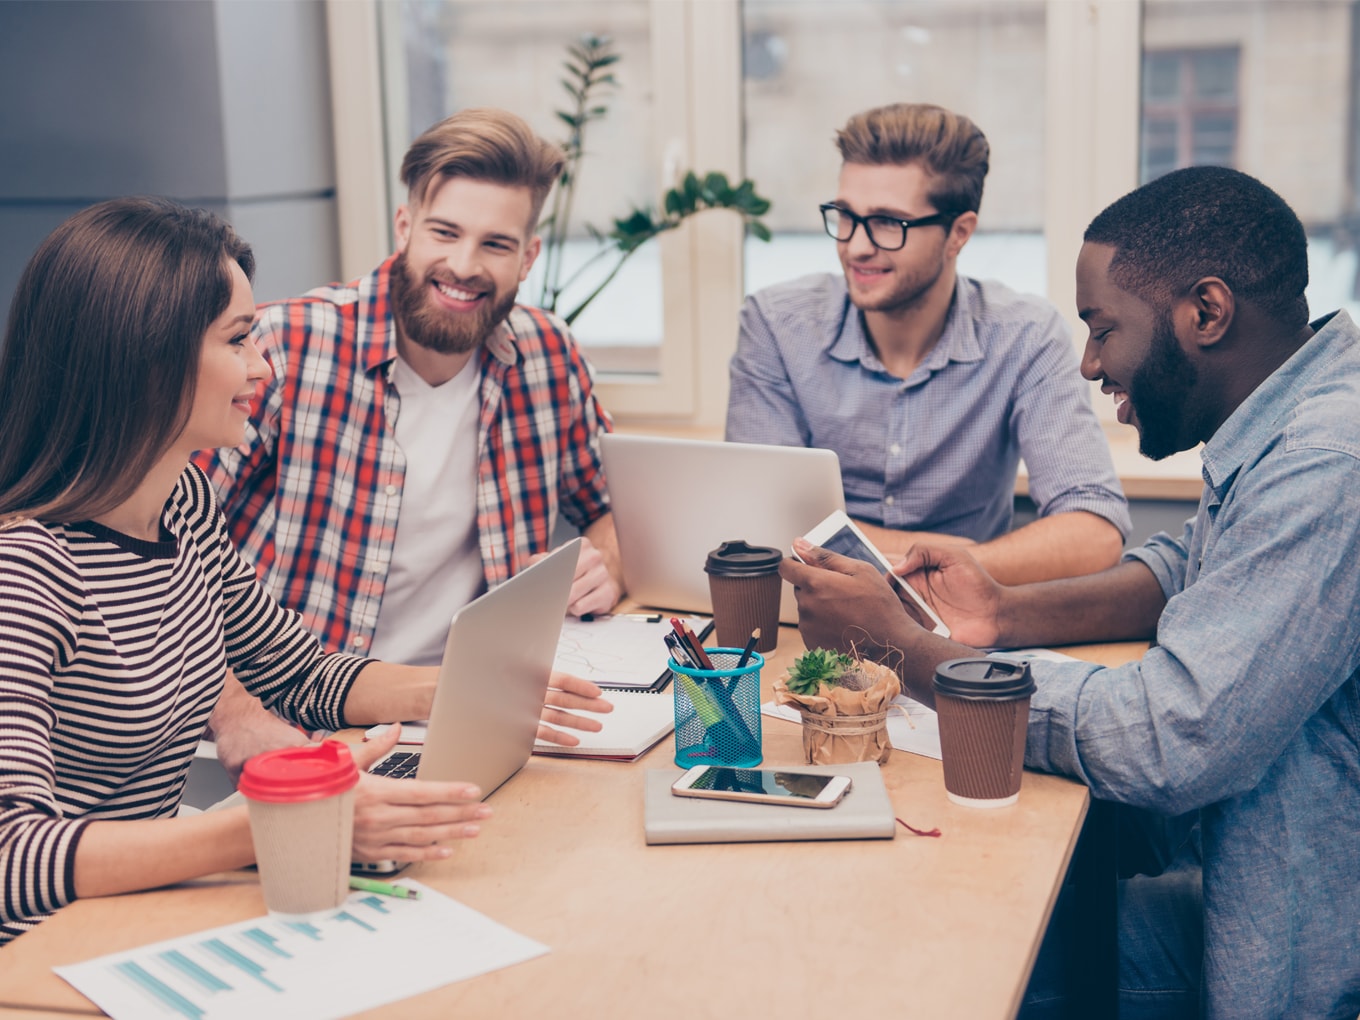 How To Build Great Company Culture